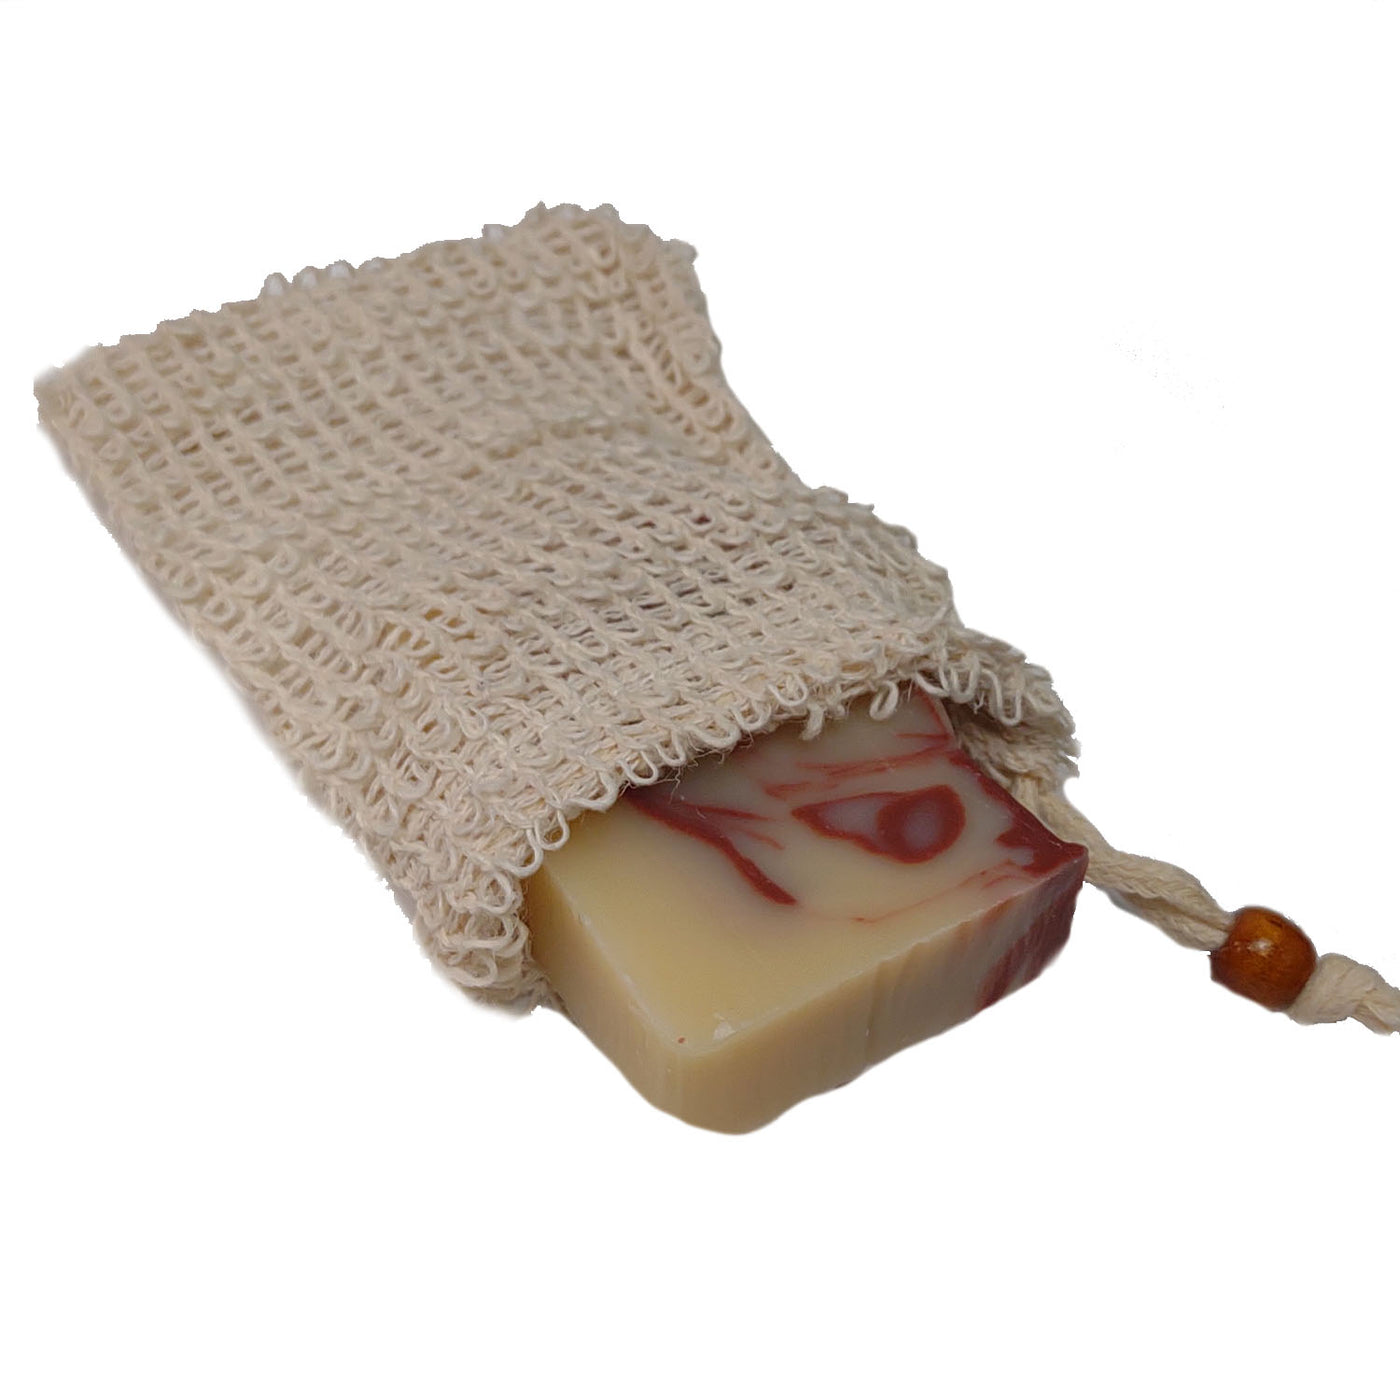 Soap bag with soap displayed (soap not included)